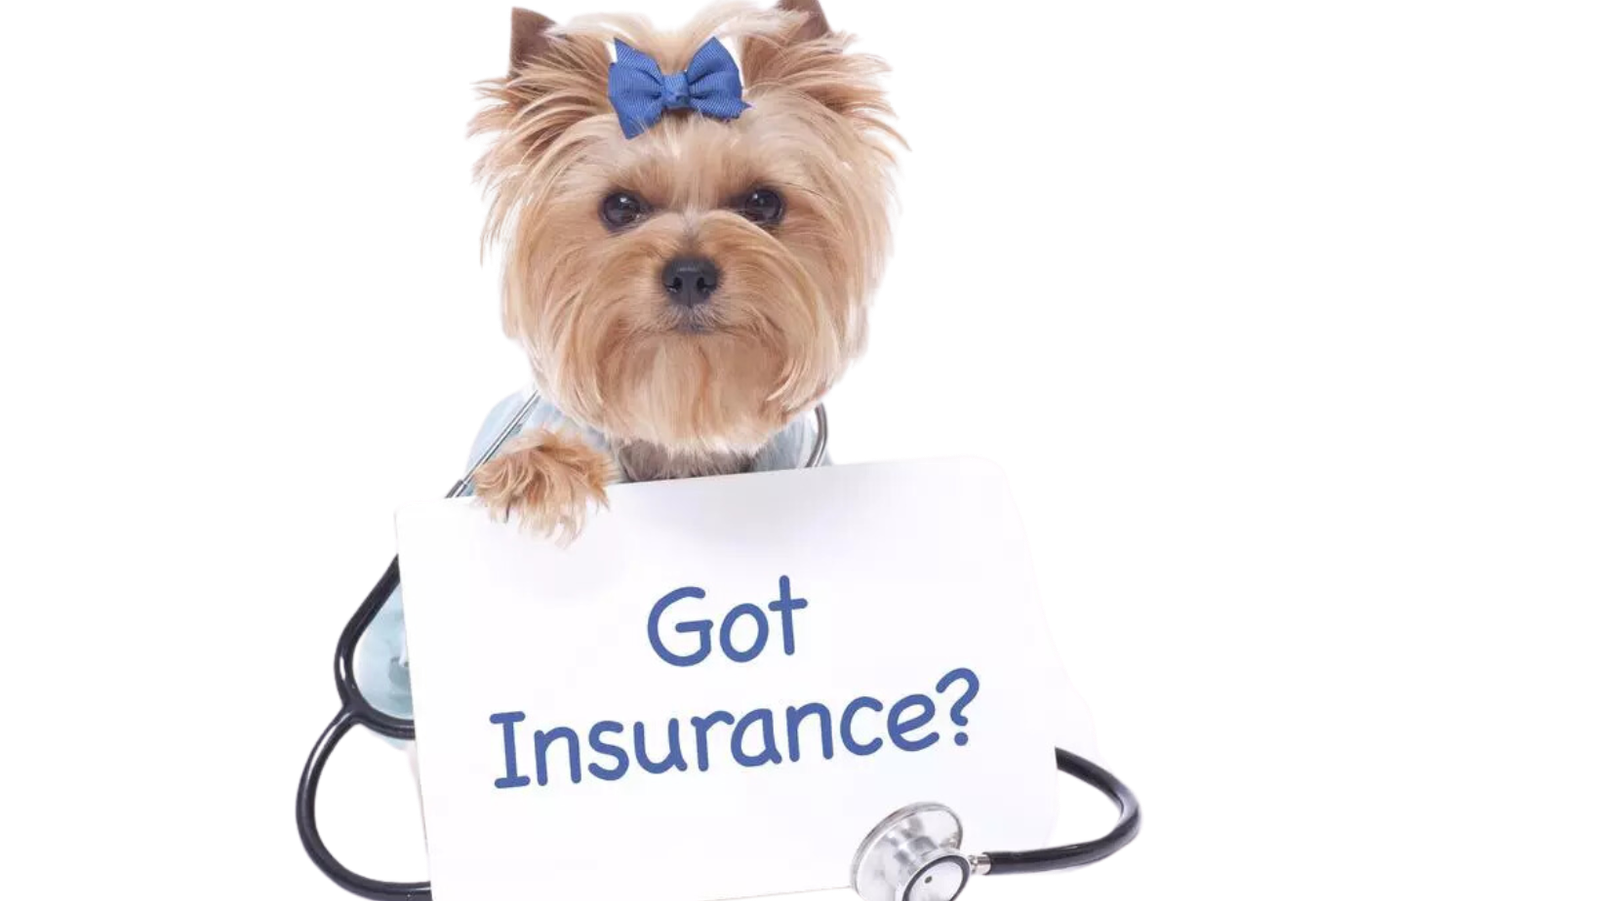 Your Furry Friend Deserves the Best: Why Pet Insurance is a Must-Have